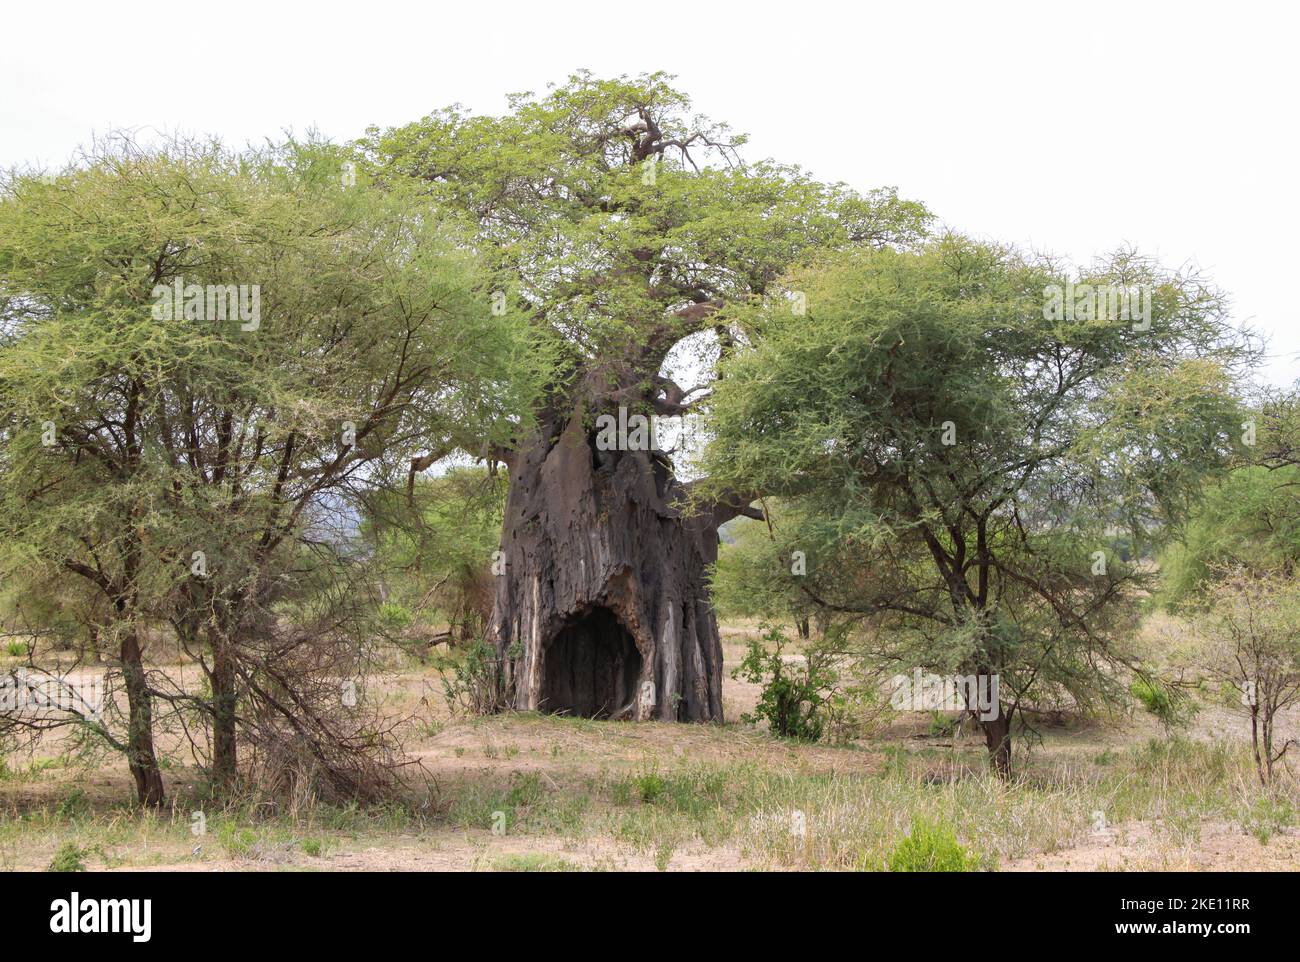 One African baobab tree with a hole in the tree trunk, in the center of the picture. The image was taken in Tanzania. Stock Photo